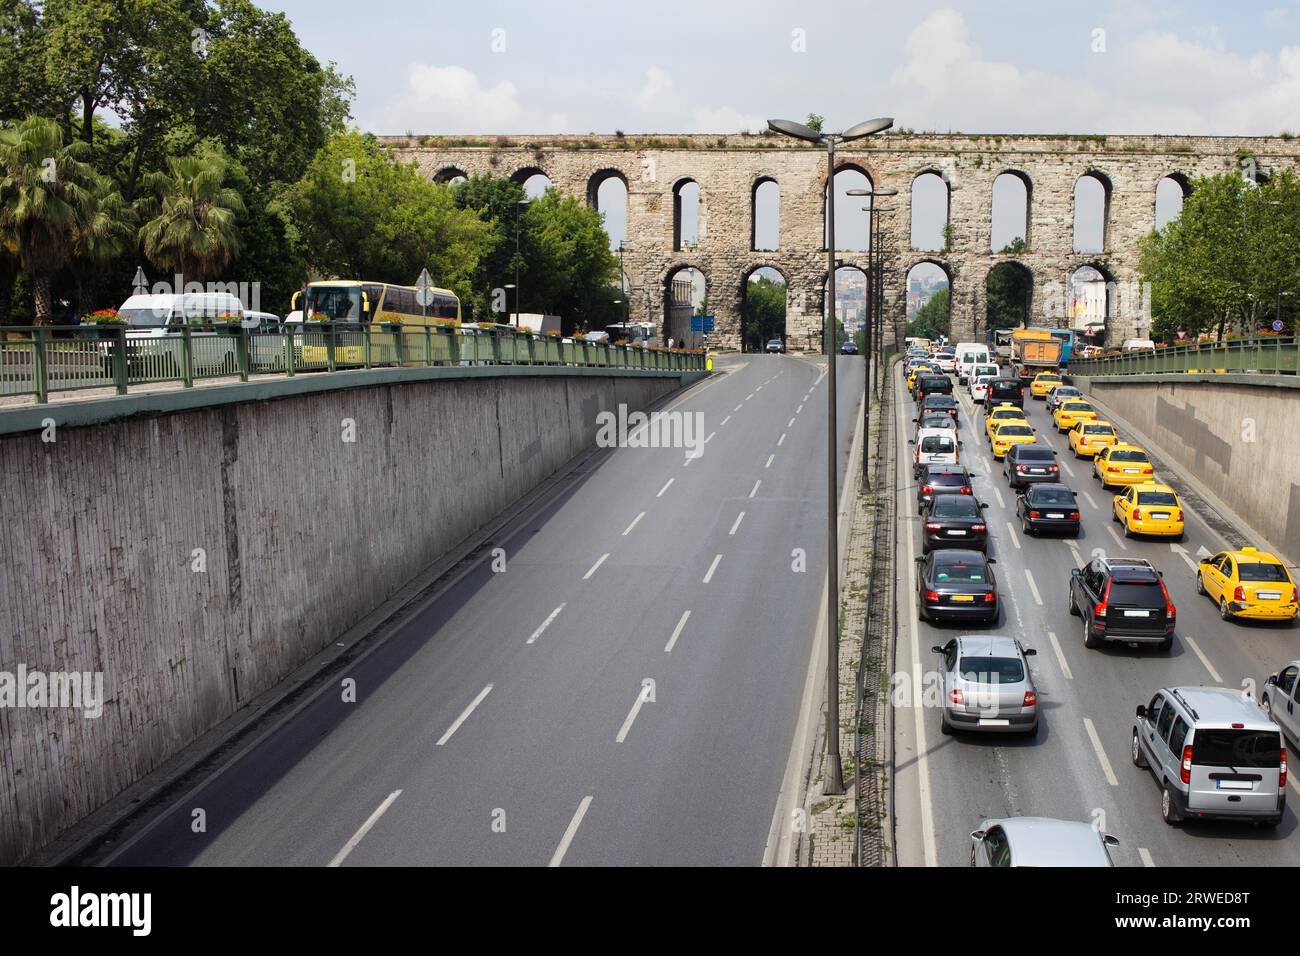 Cars on Ataturk Boulevard and Valens Aqueduct in Istanbul, Turkey Stock Photo